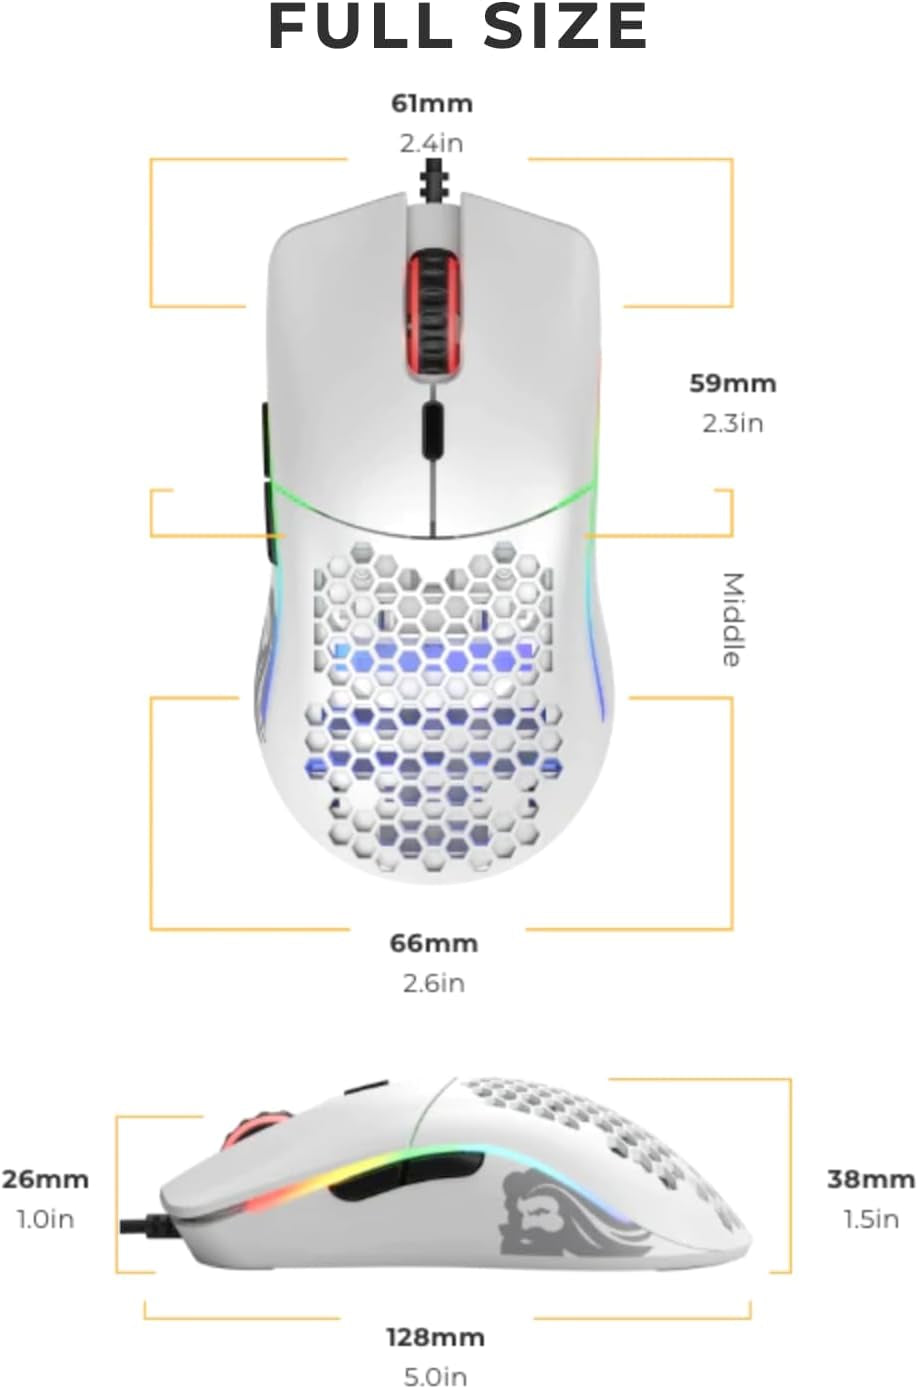 Model O Wired Gaming Mouse 67G Superlight Honeycomb Design, RGB, Pixart 3360 Sensor, Omron Switches, Ambidextrous - Matte White